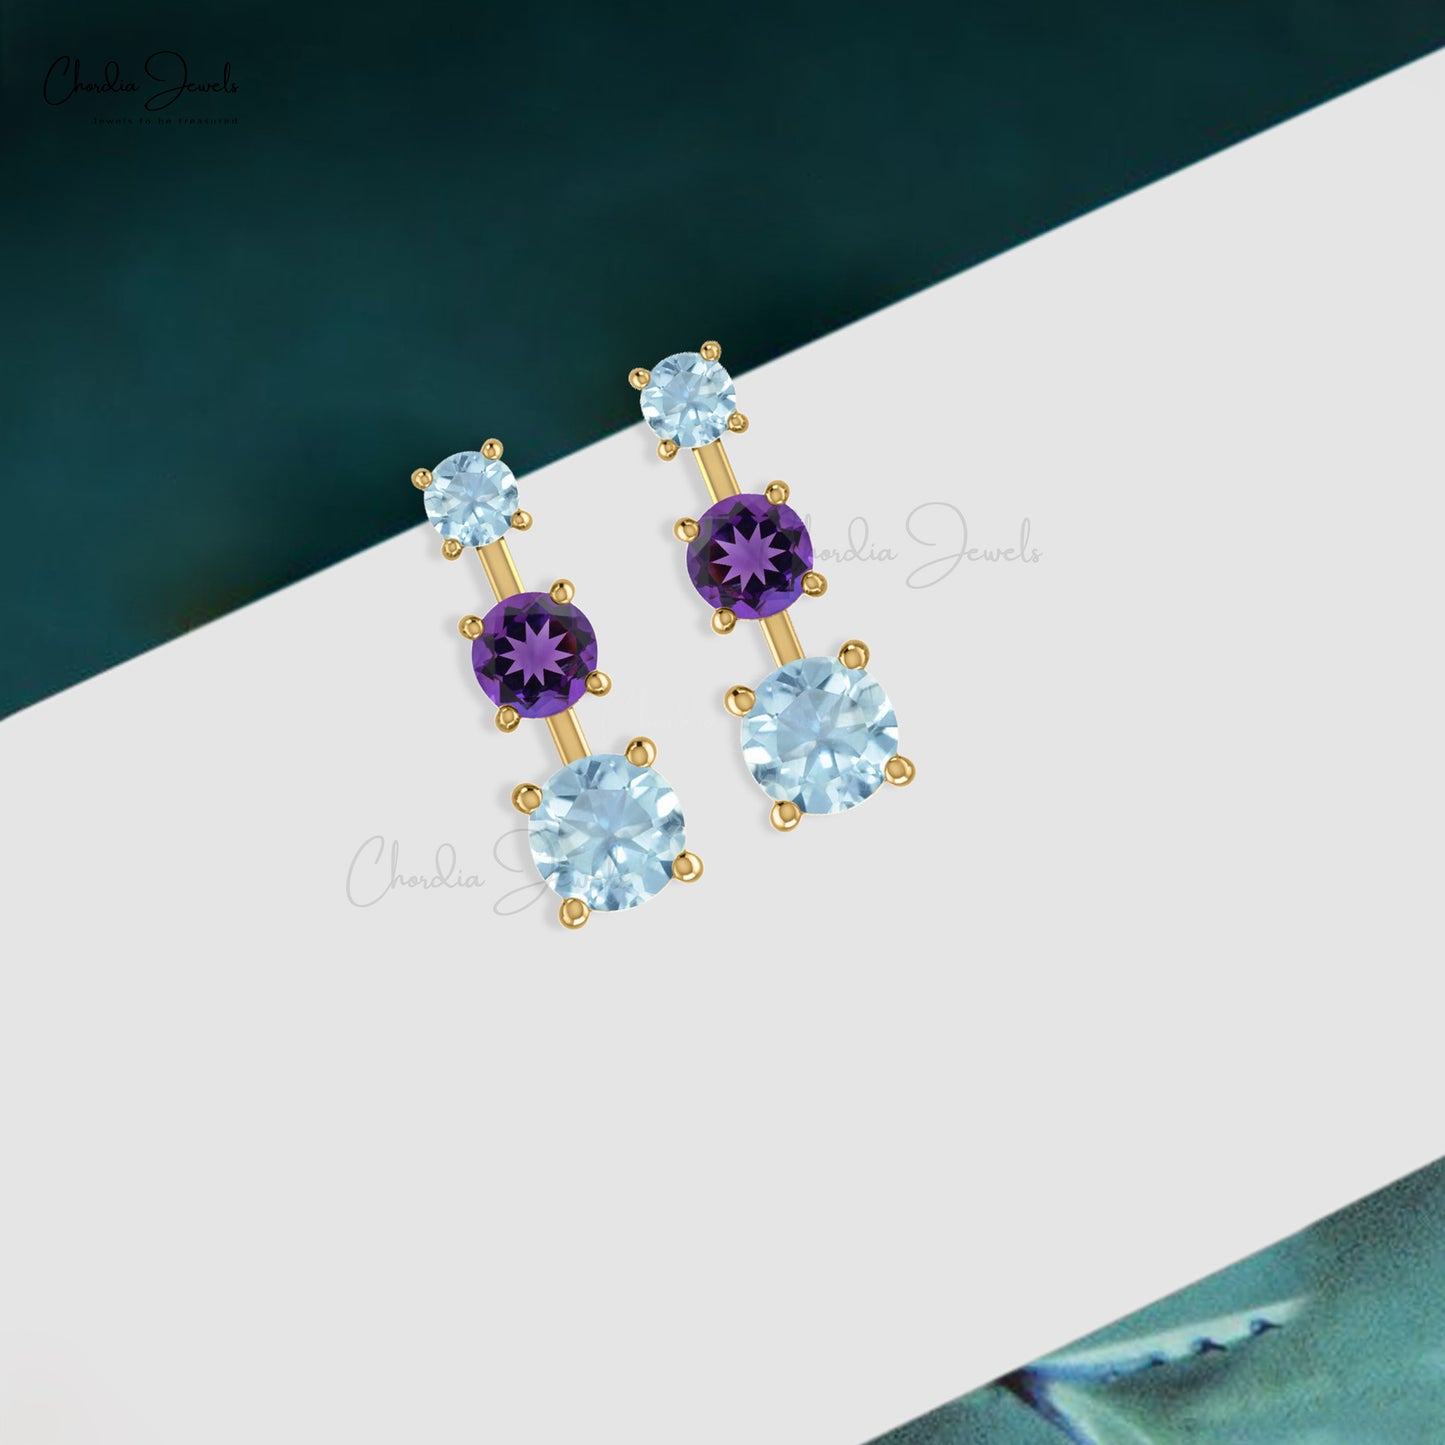 Genuine Amethyst Trinity Studs 4mm Round Cut Natural Gemstone Push Back Earrings 14k Real Gold Aquamarine Grace Jewelry For Surprise Gift